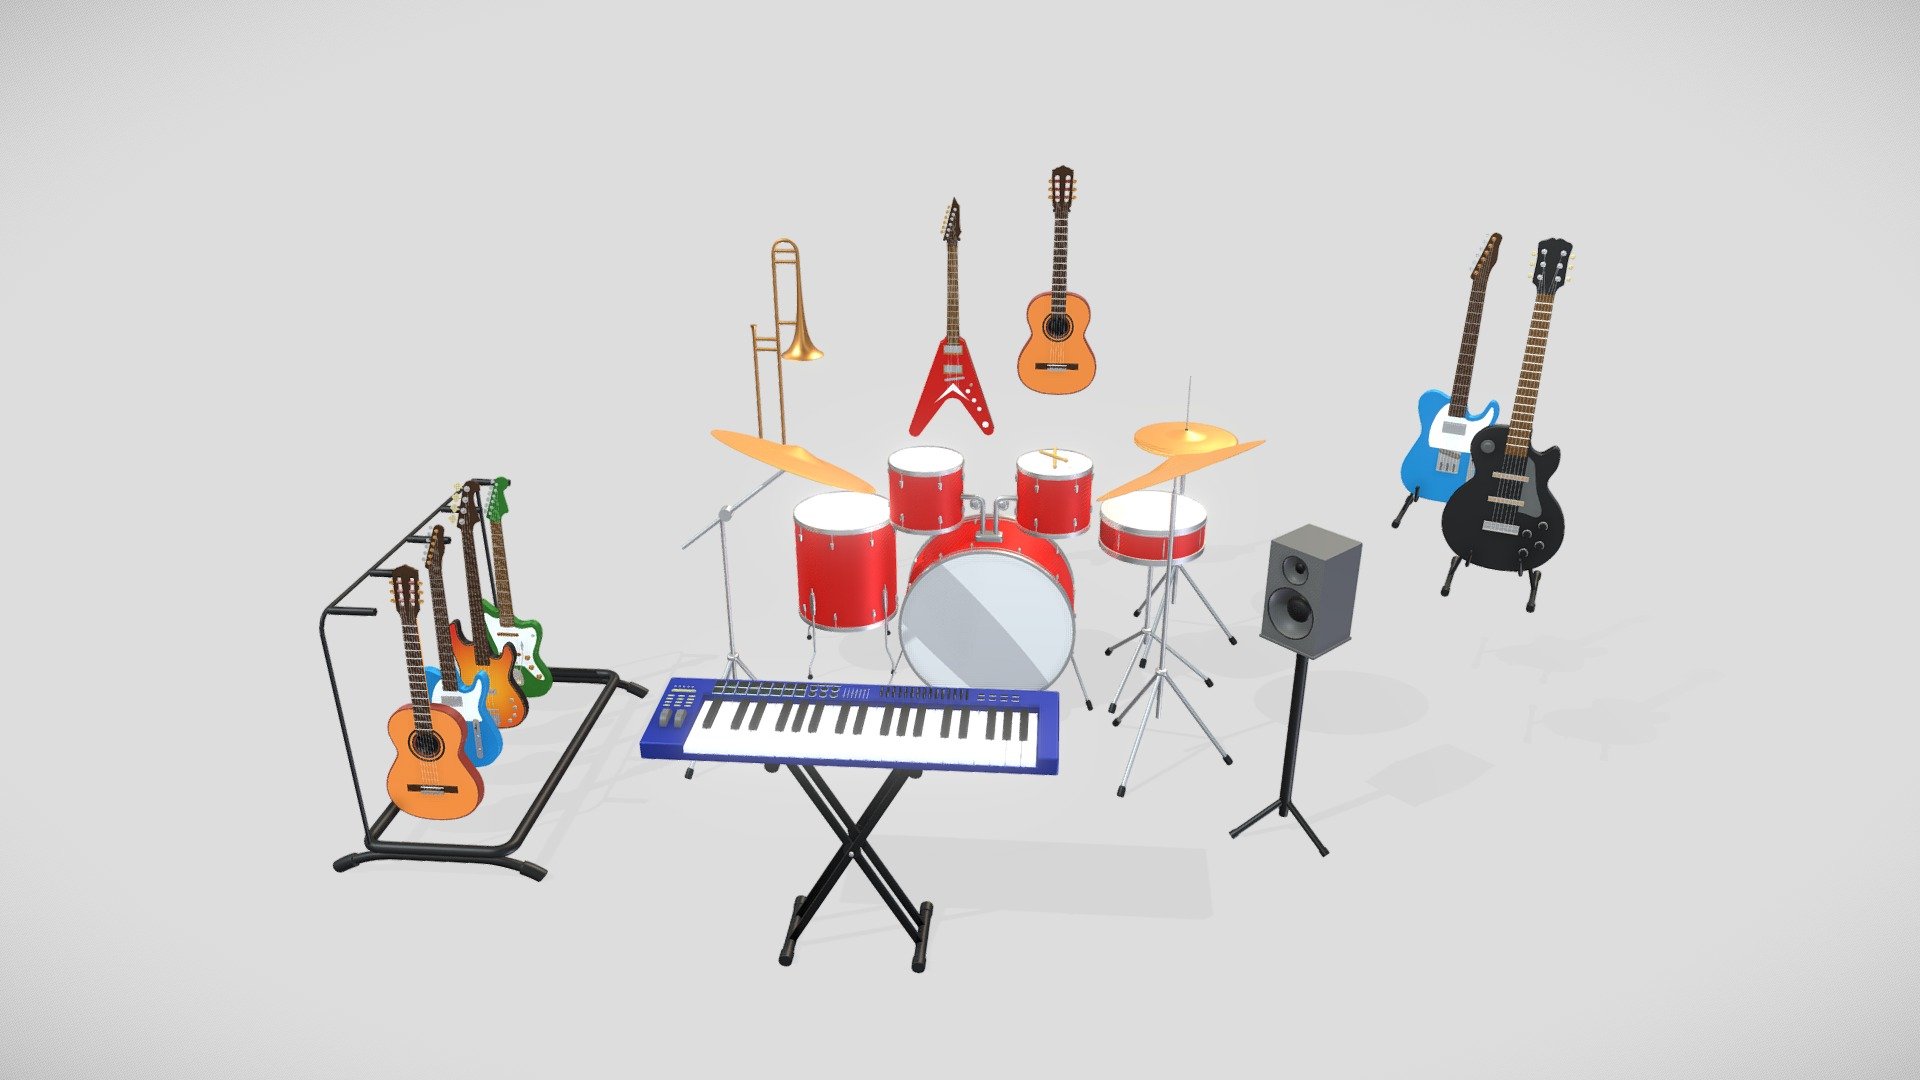 In this pack of musical assets you will find the following stylized instruments:


6 guitars
4 drums
Cymbals
Keyboard/Piano
speakers
Racks and stands for instruments
 - Music room - Set of instruments - Buy Royalty Free 3D model by cpineda3d 3d model